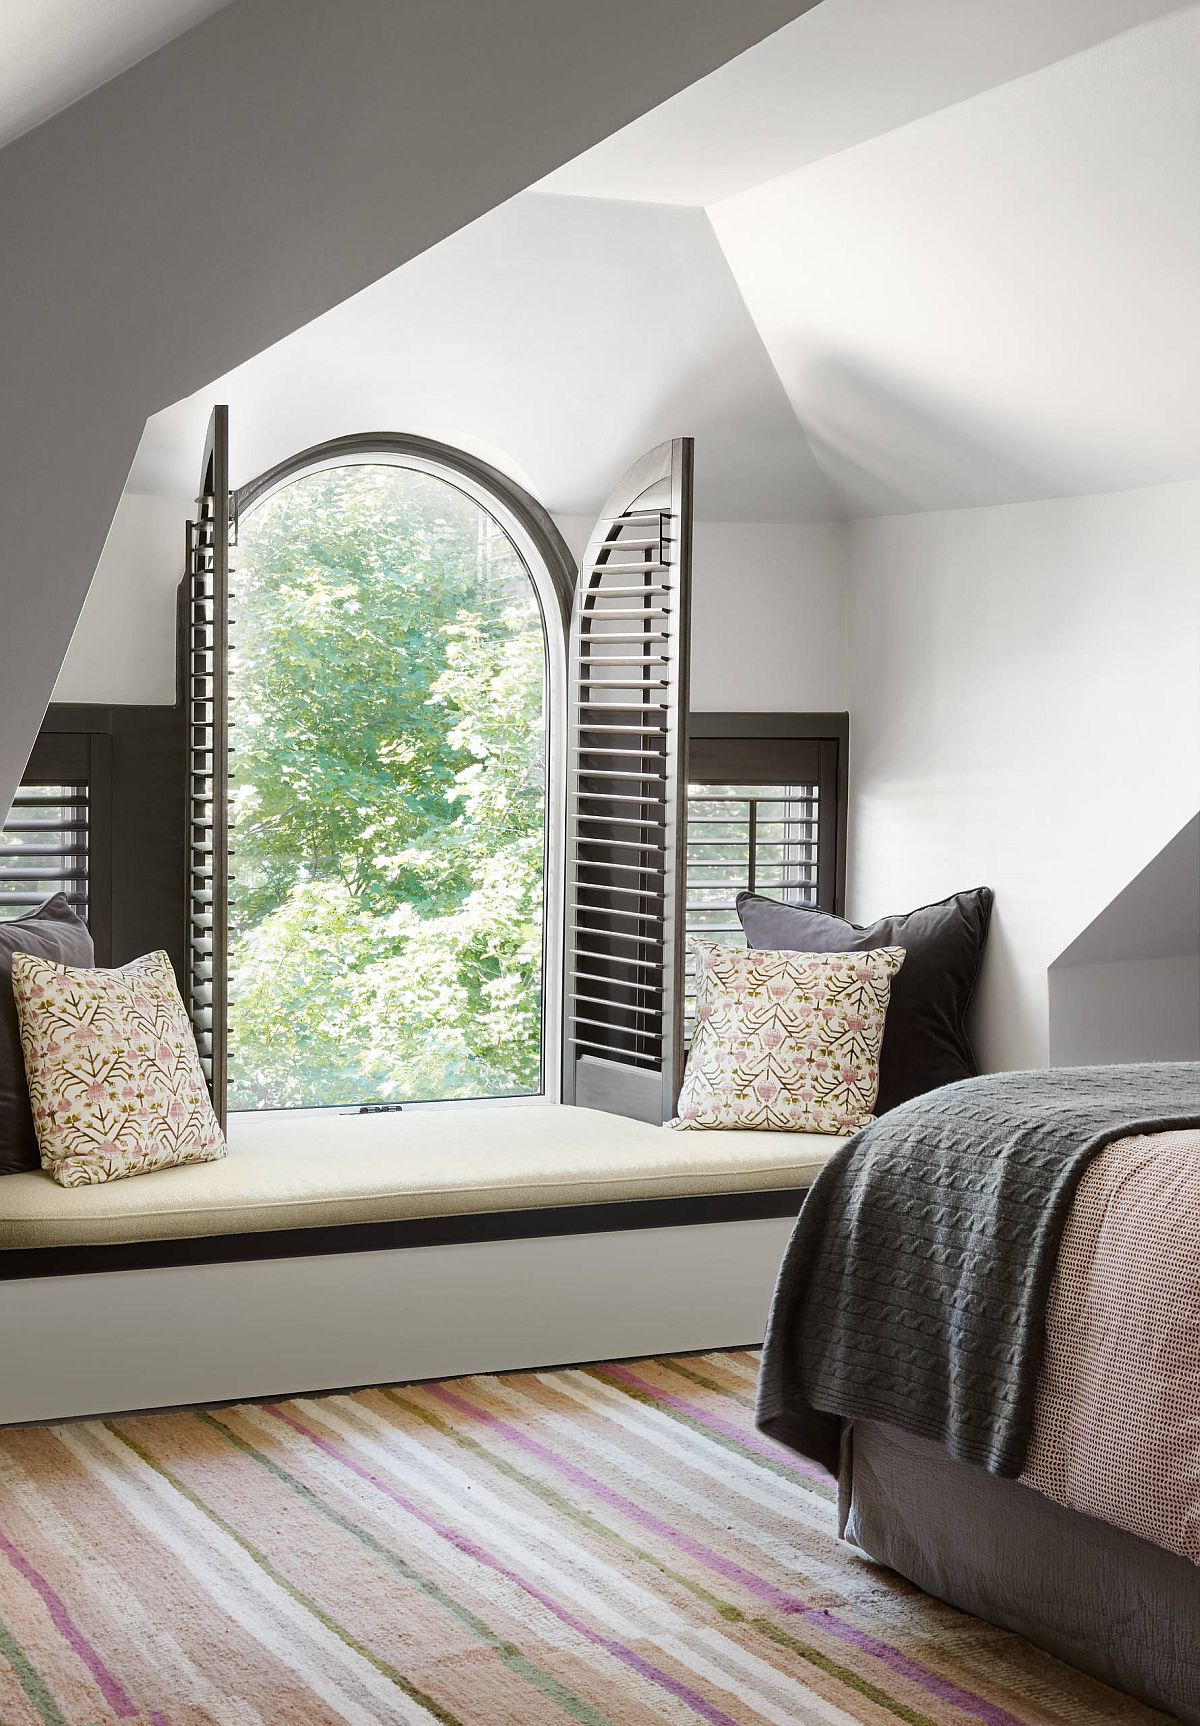 Window seat coupled with arched window gives the modern bedroom traditional appeal